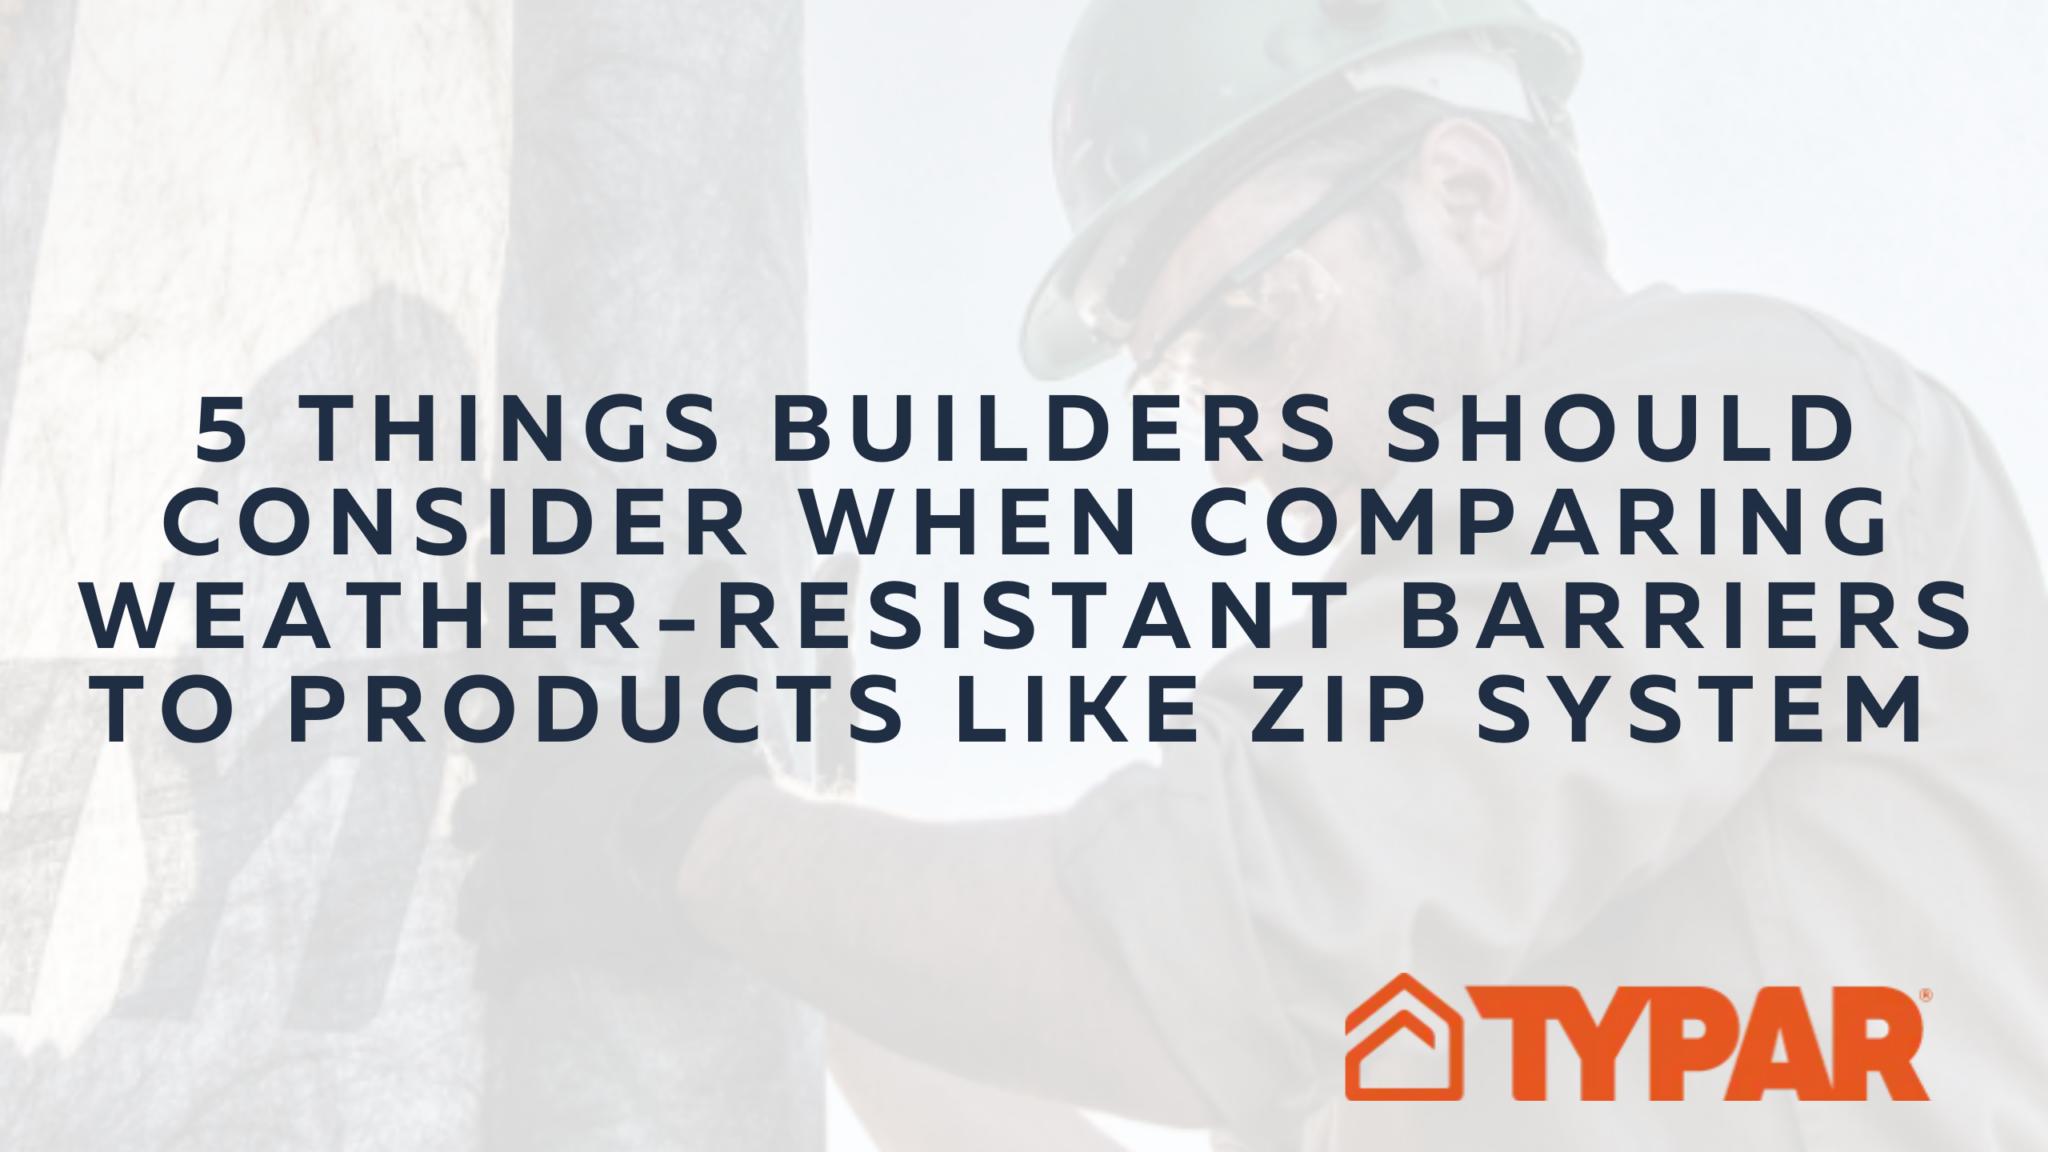 5 Things Builders Should Consider Comparing Weather Barriers